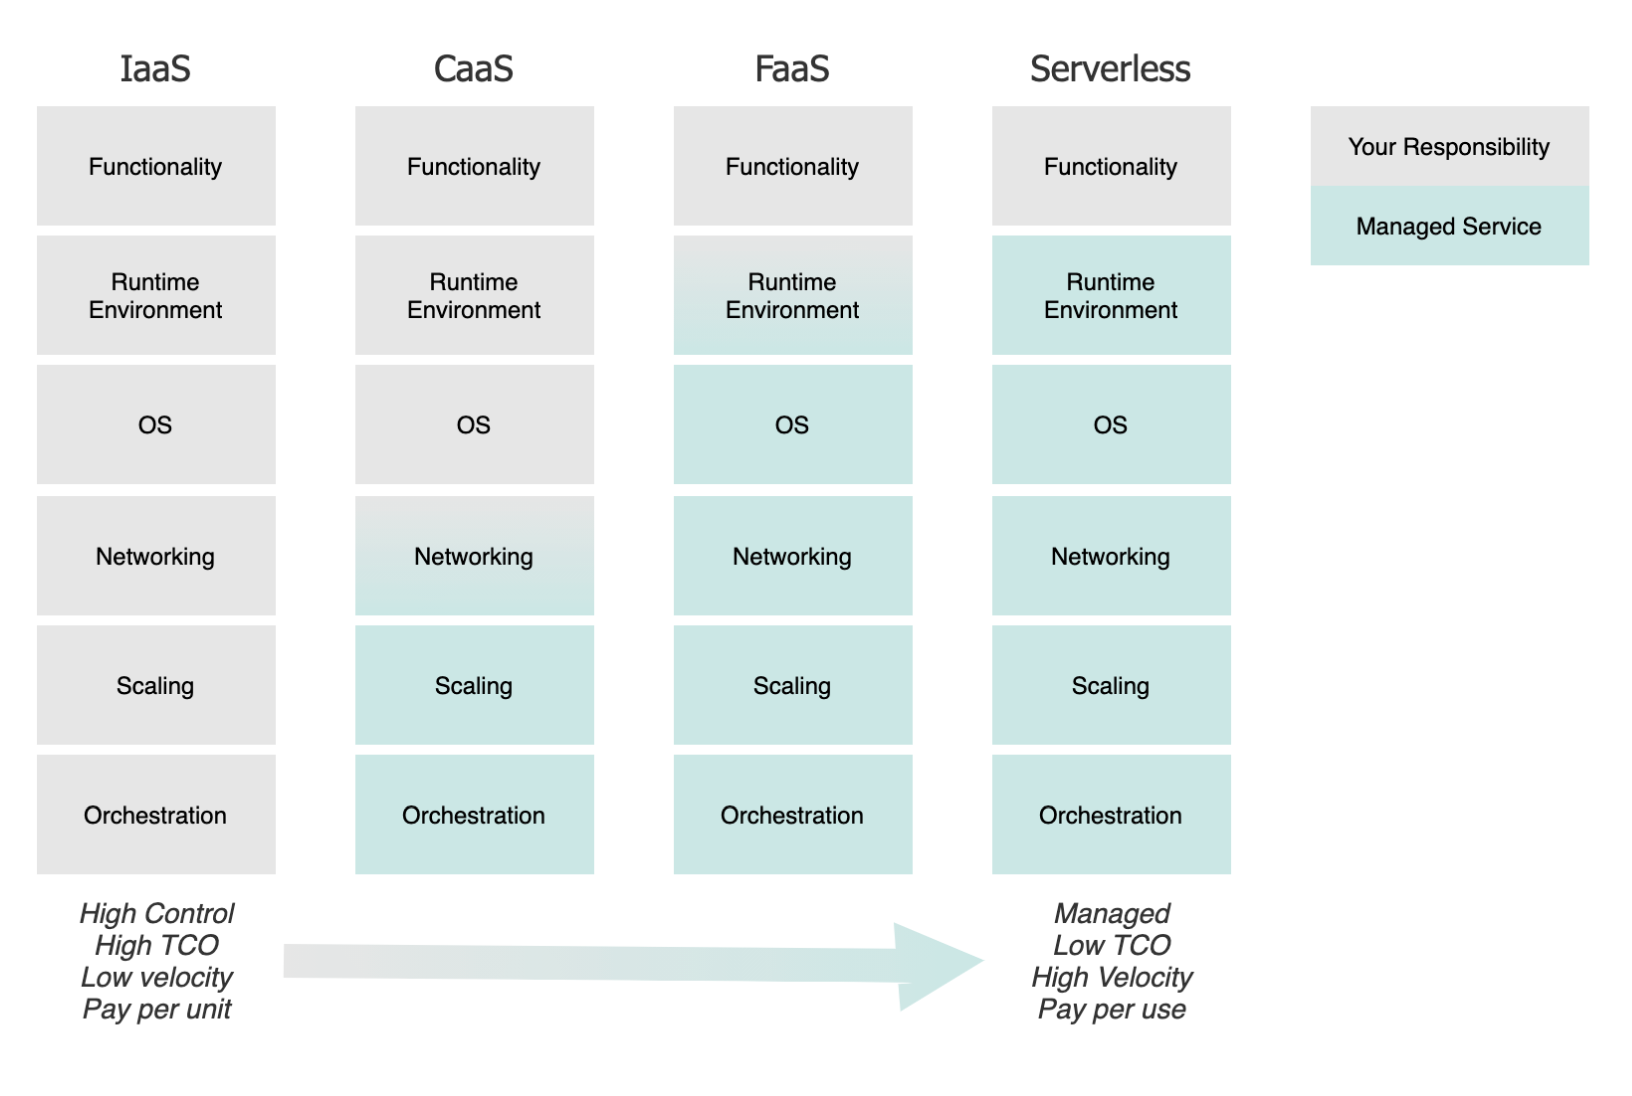  “Function-as-a-Service” deployment model.